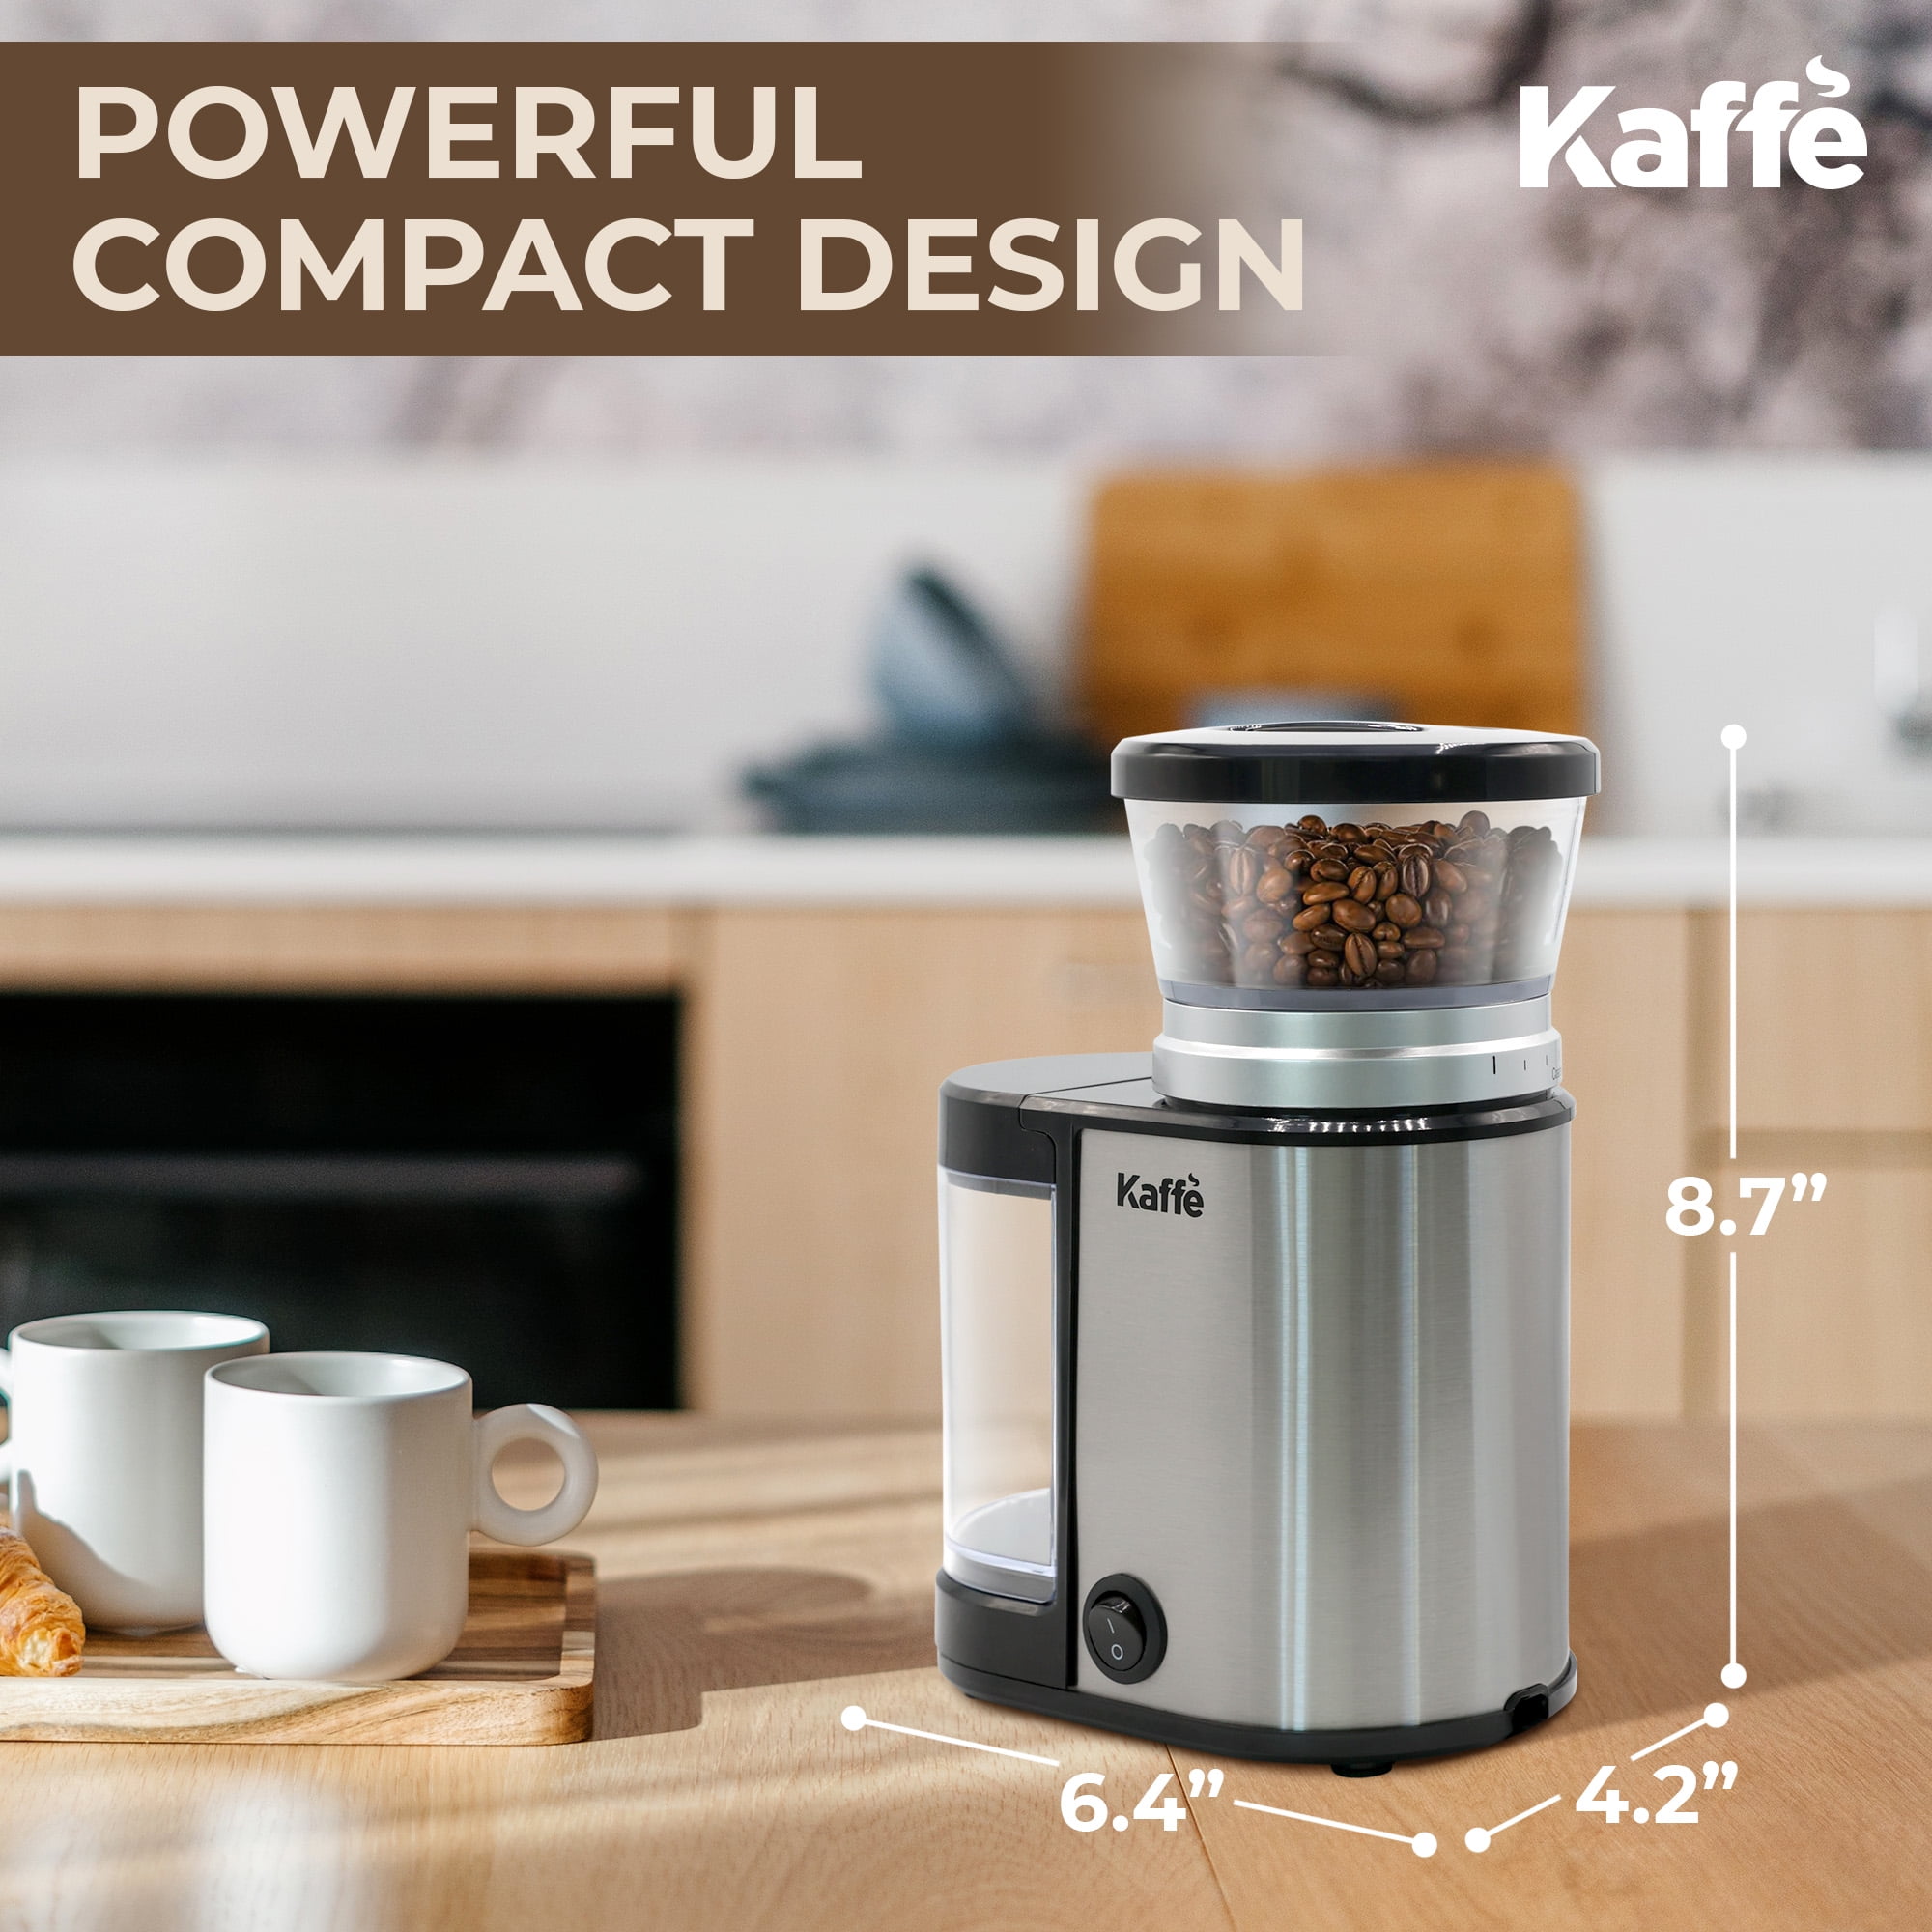 Kaffe Coffee Grinder Electric. Best Coffee Grinders for Home Use. (14 Cup)  Easy On/Off w/Cleaning Brush Included. Stainless Steel